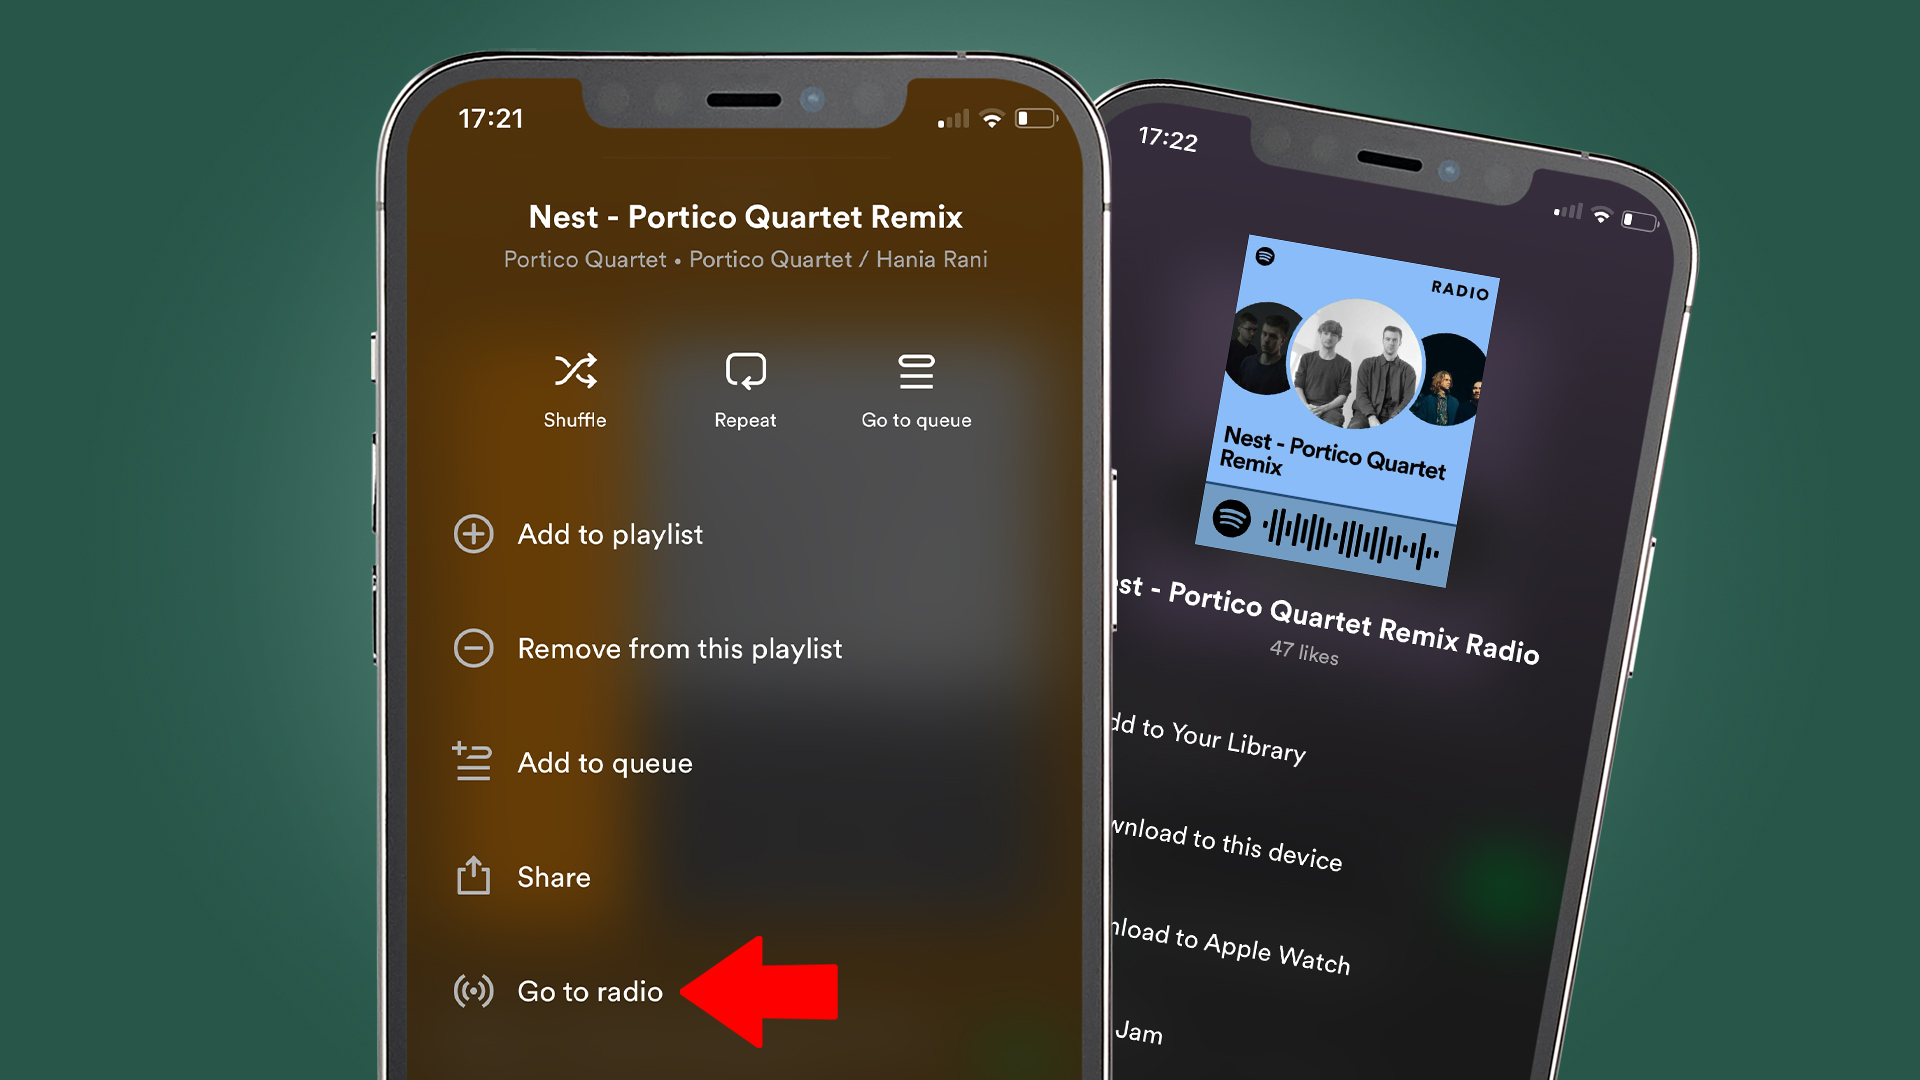 A phone screen on a green background showing the Spotify app